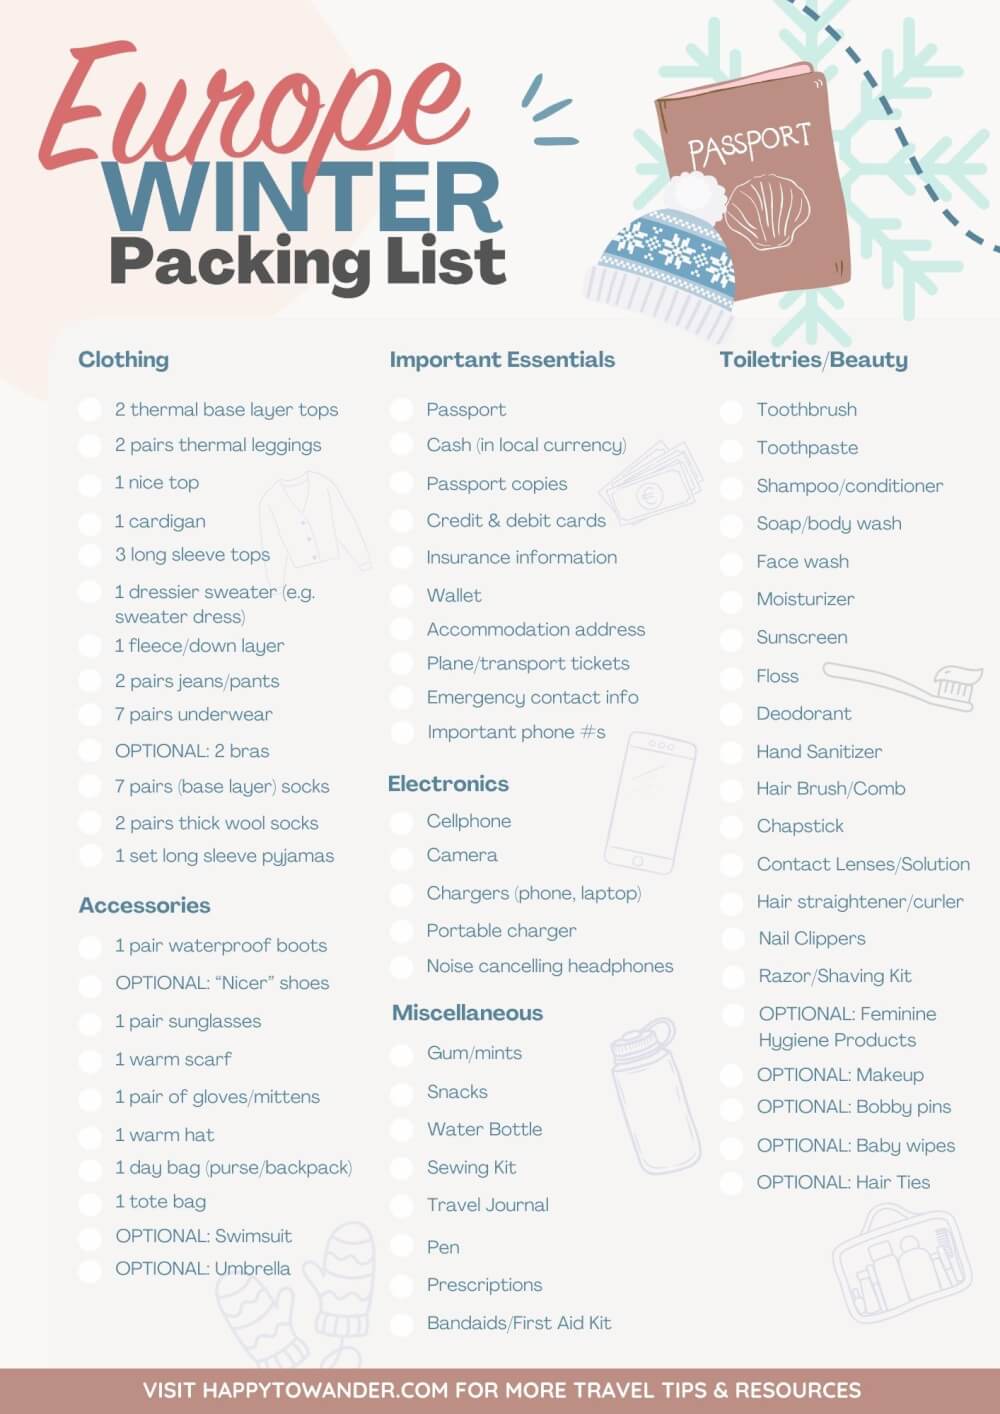 Winter Travel Packing List: What to Pack for a Cold Weather Trip